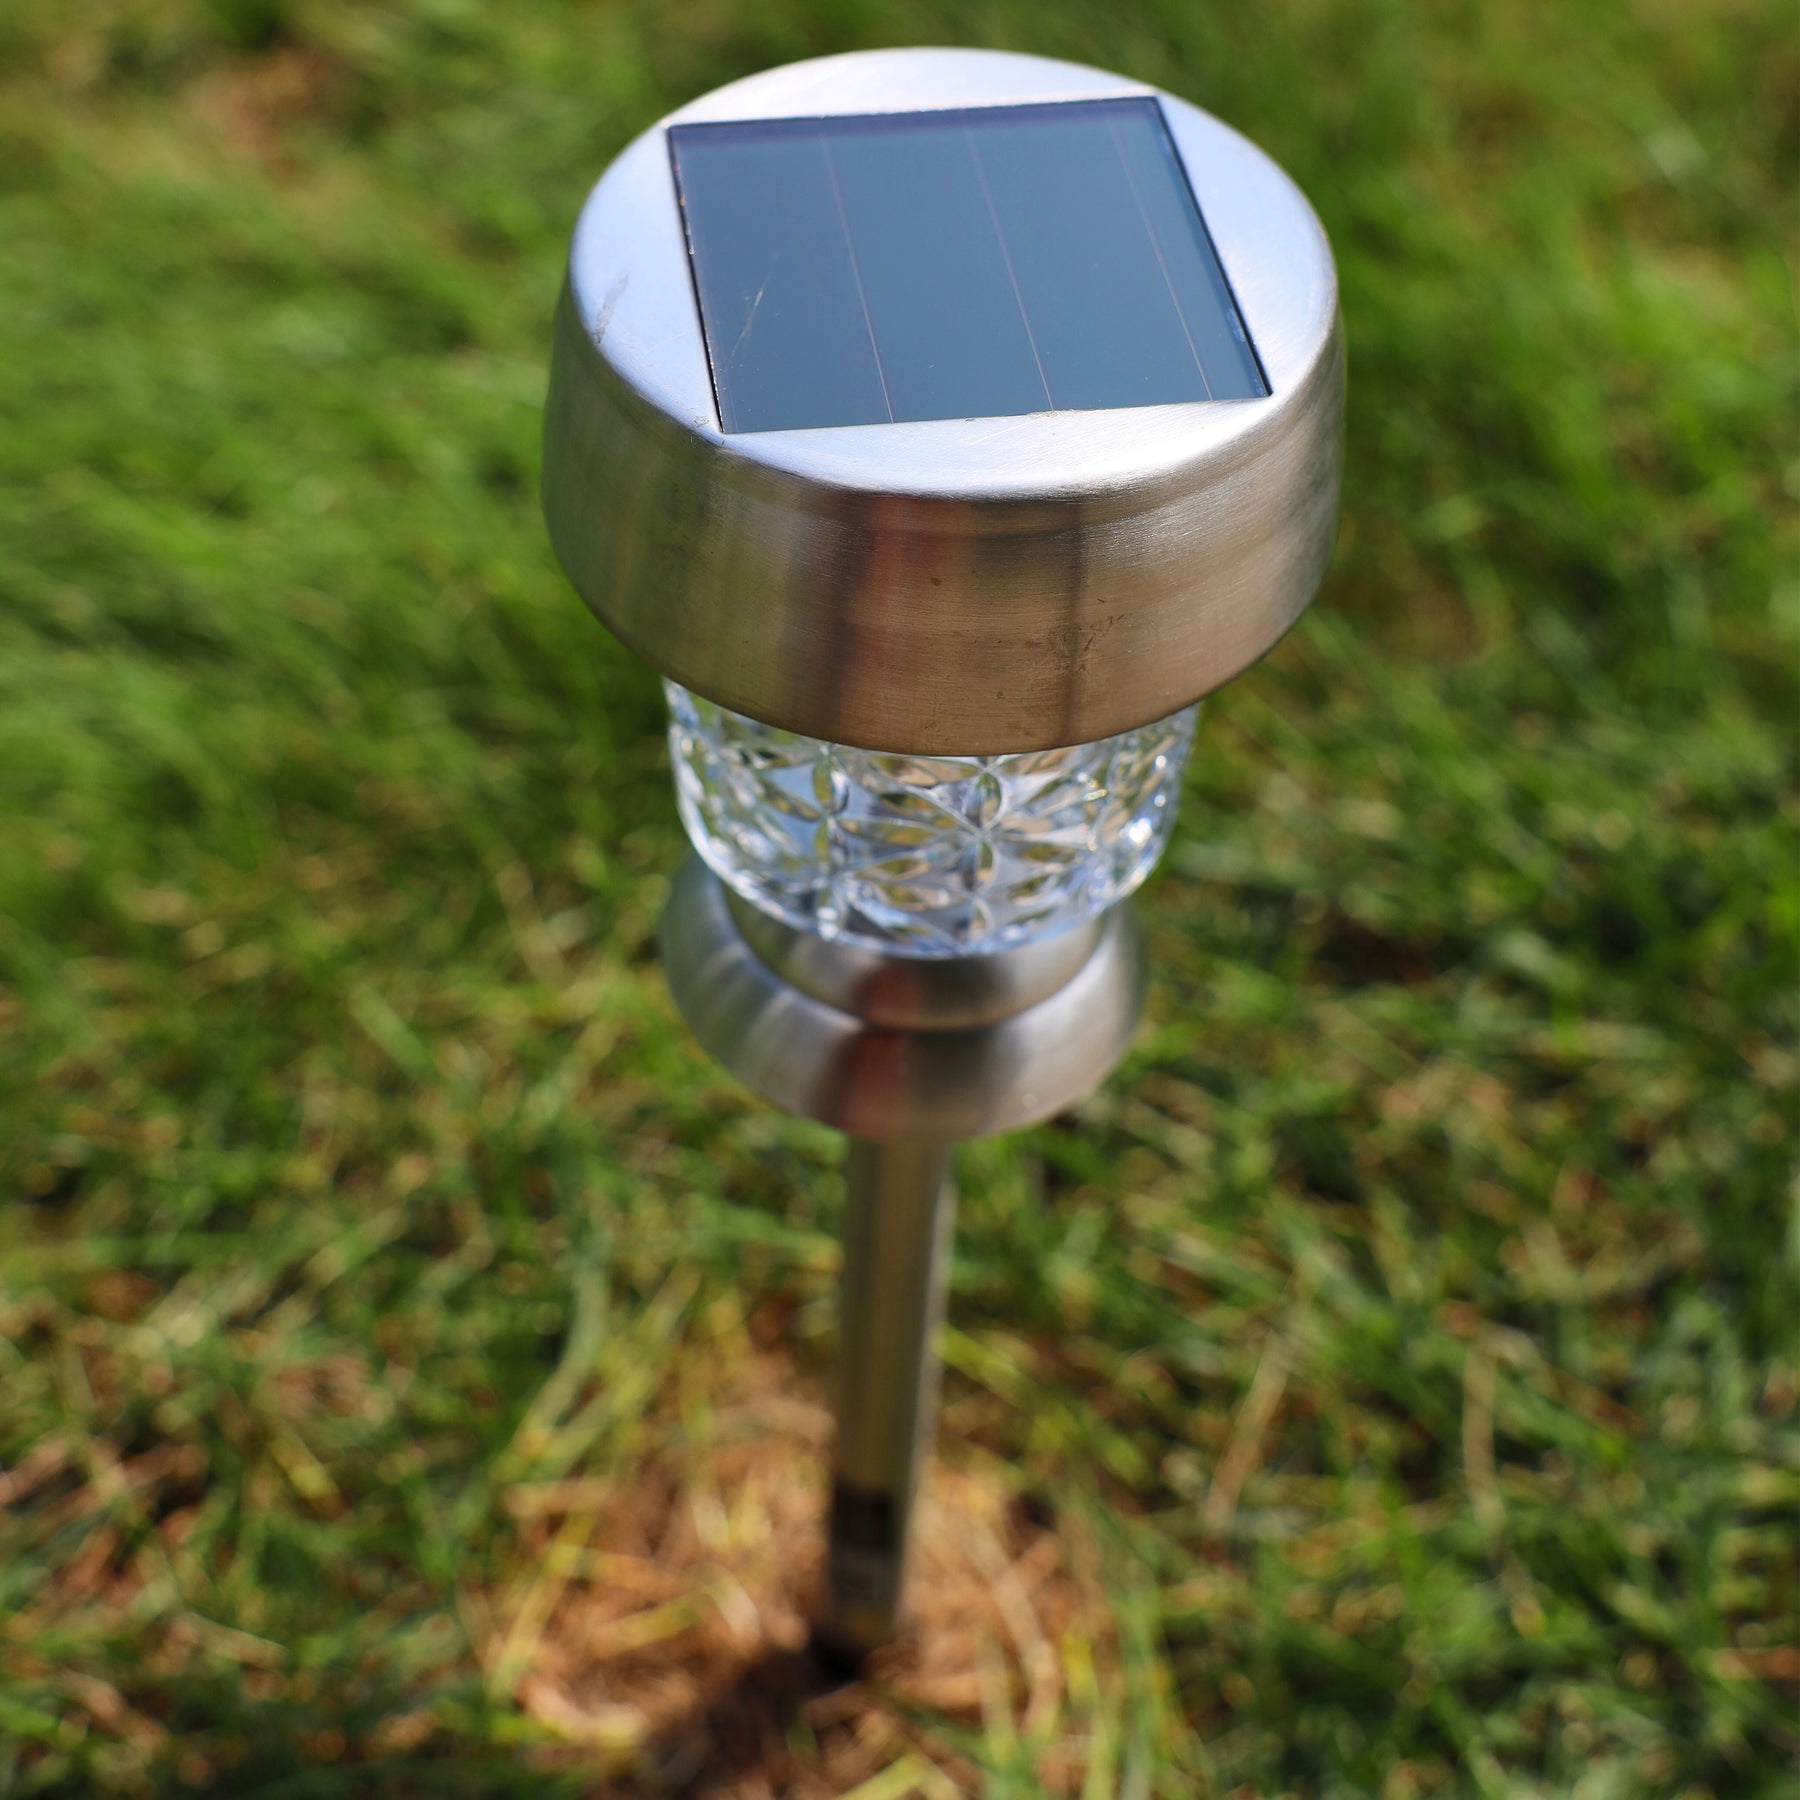 Top-angled view of the 14-inch Stainless Steel Solar Powered LED Pathway Light staked in the ground, showing the solar panel on top.